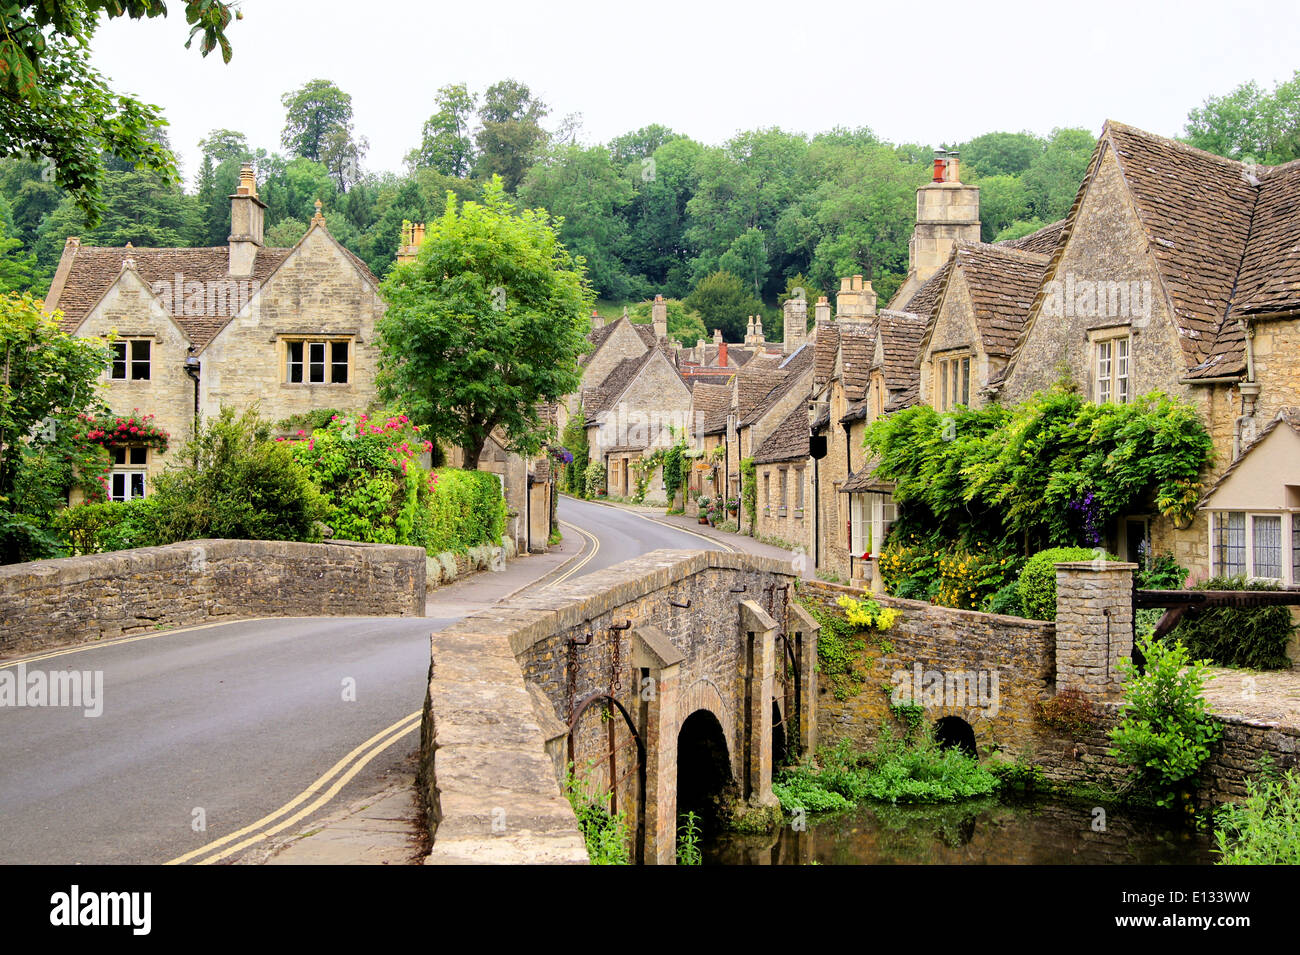 Picturesque Cotswold Village Of Castle Combe England Stock Photo